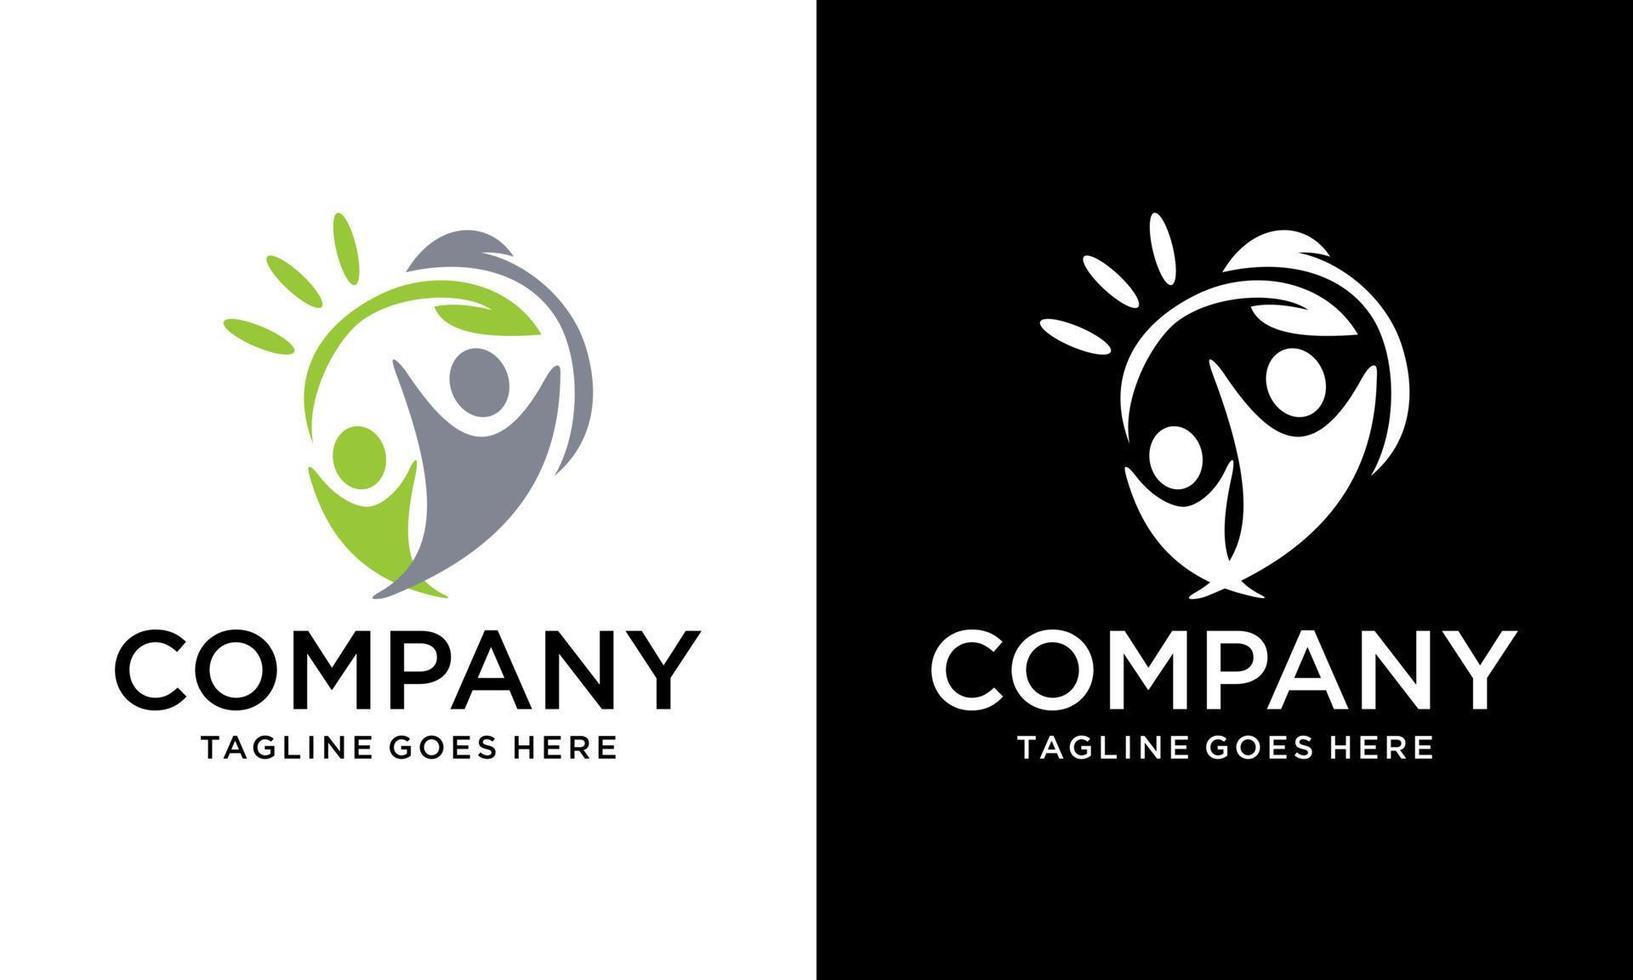 People hearth care logo, Medical Clinic, Human leaf logo, Herbal nutrition and Fitness logo template. Leaf and people vector logo design concept. Environment symbol logo icon